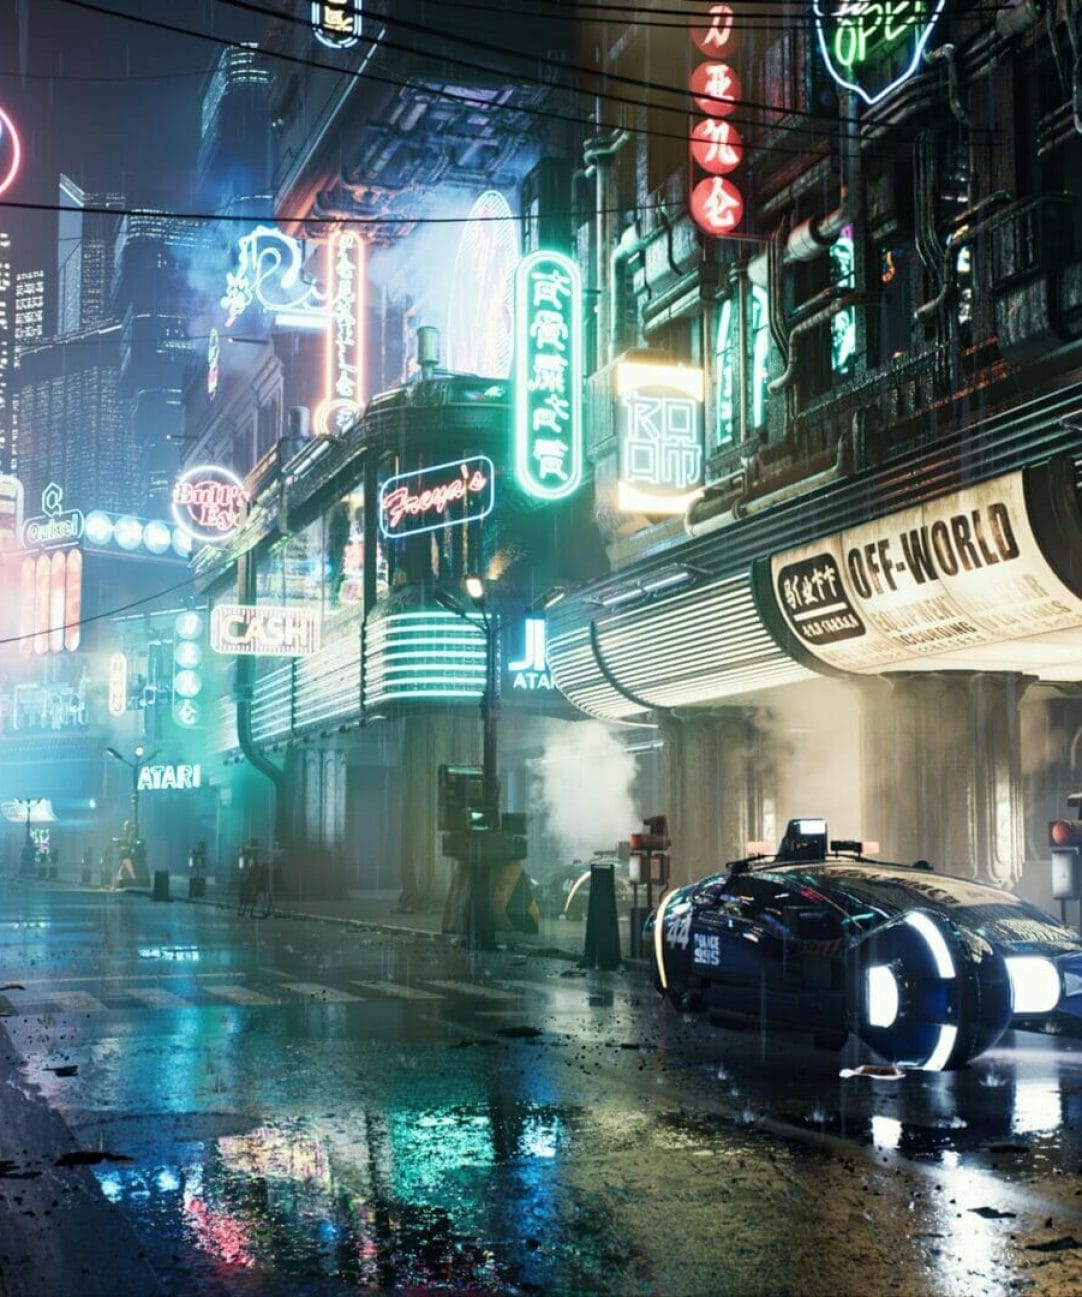 Star and Shadow: BLADE RUNNER (THE FINAL CUT)